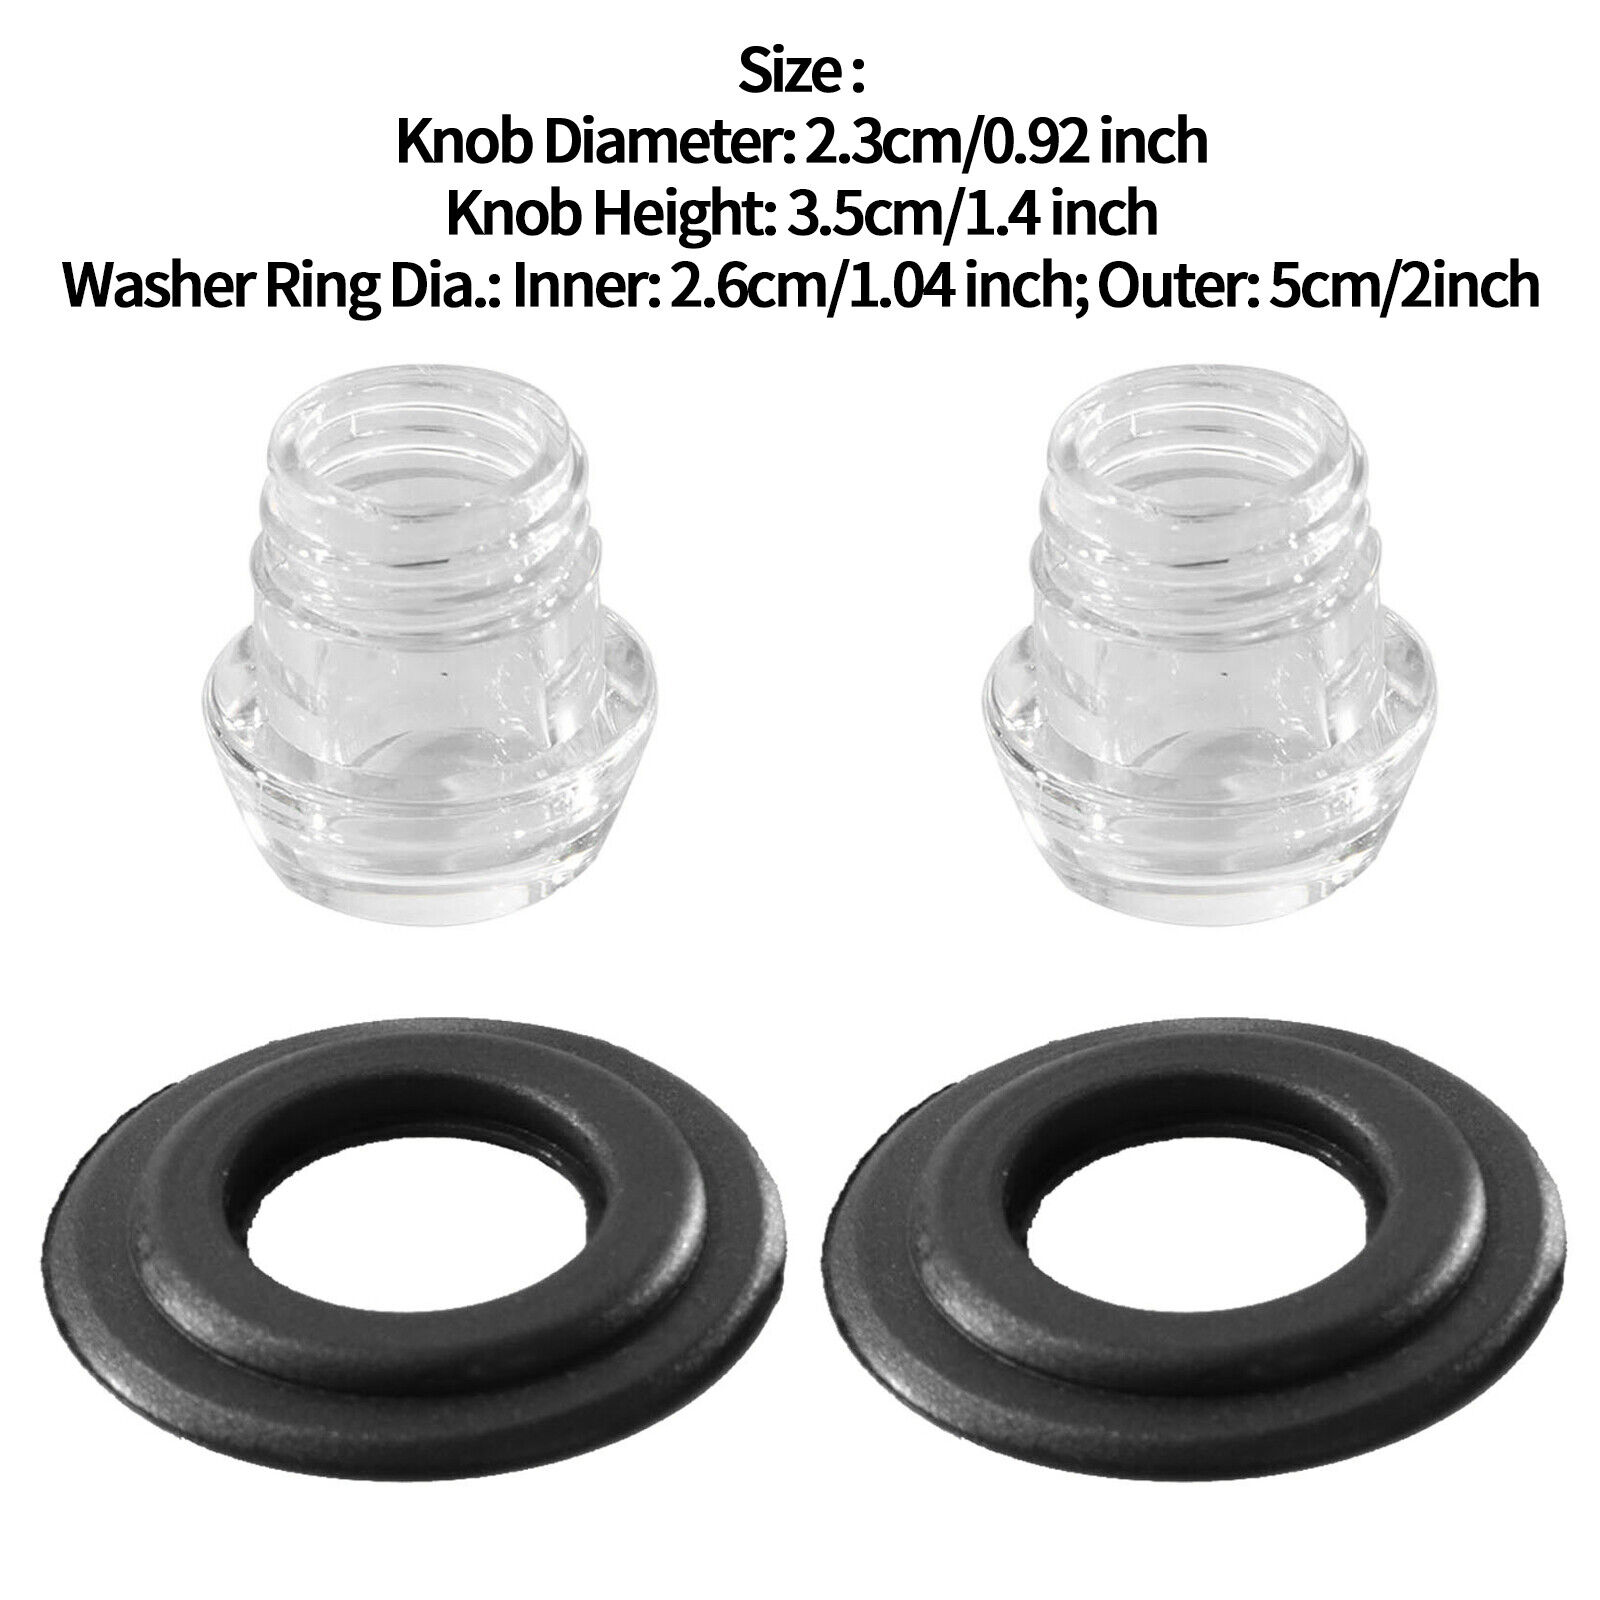 US 2Pcs Plastic Knob Top and Washer Rings for Most Coffee Percolator Pot Top